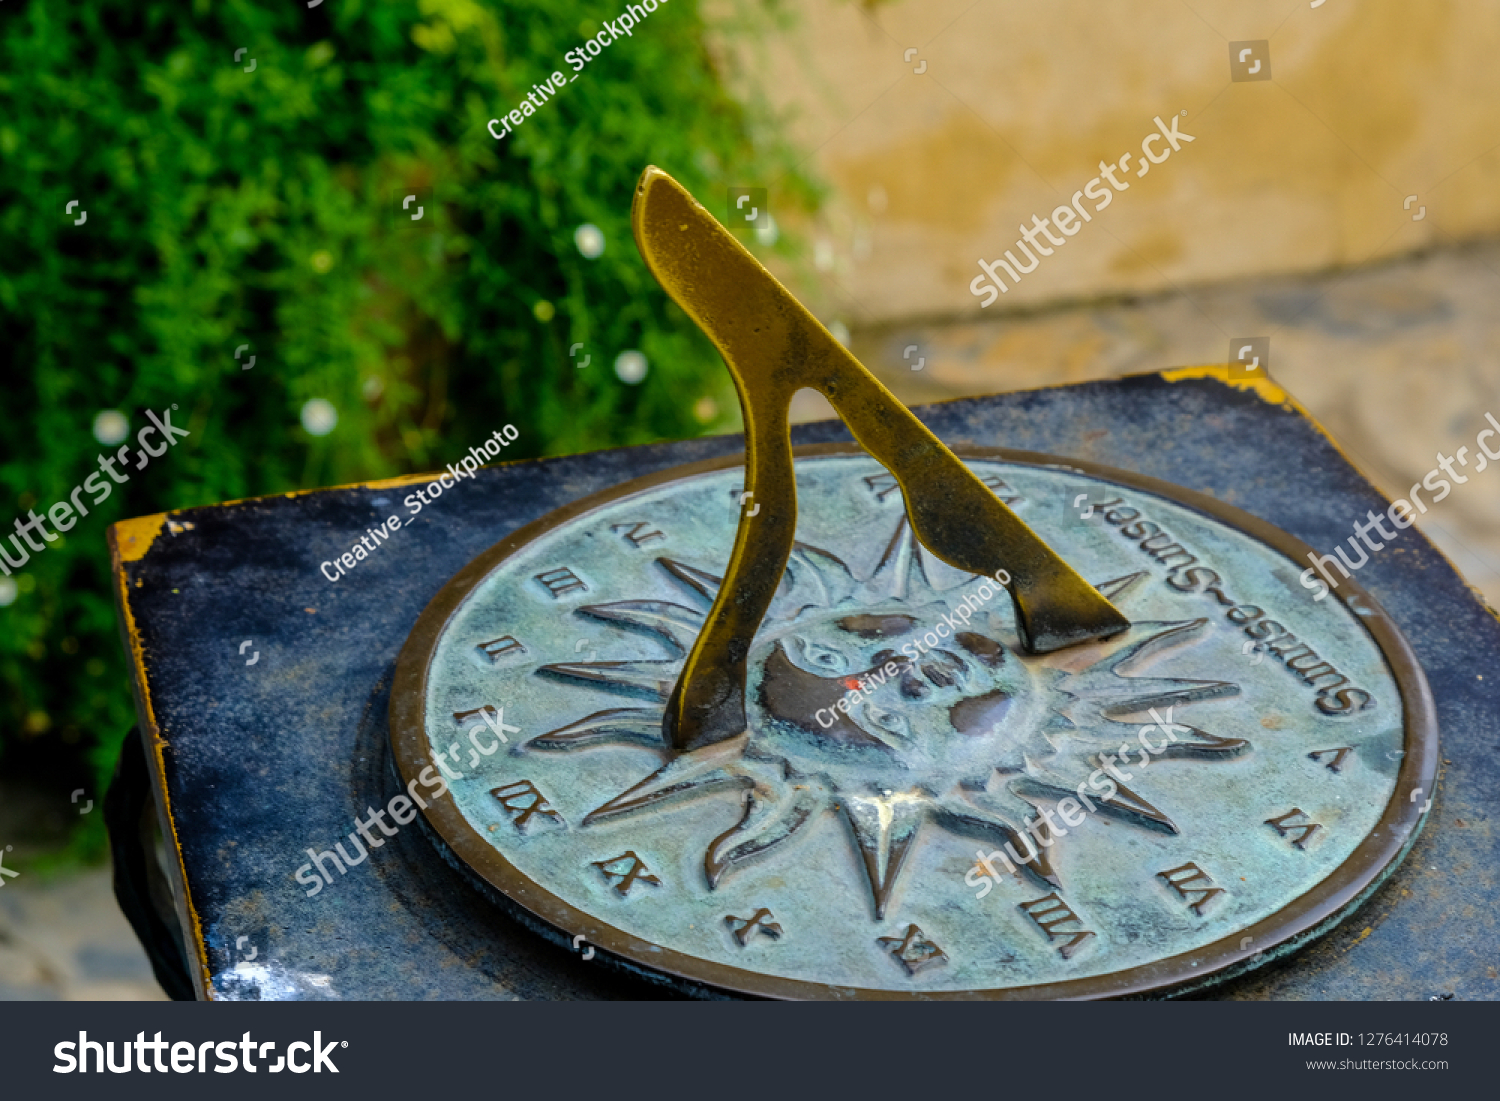 Close-up of a brass sundial mounted on a stone plinth in a garden, Sundial in the Summer sun. #1276414078